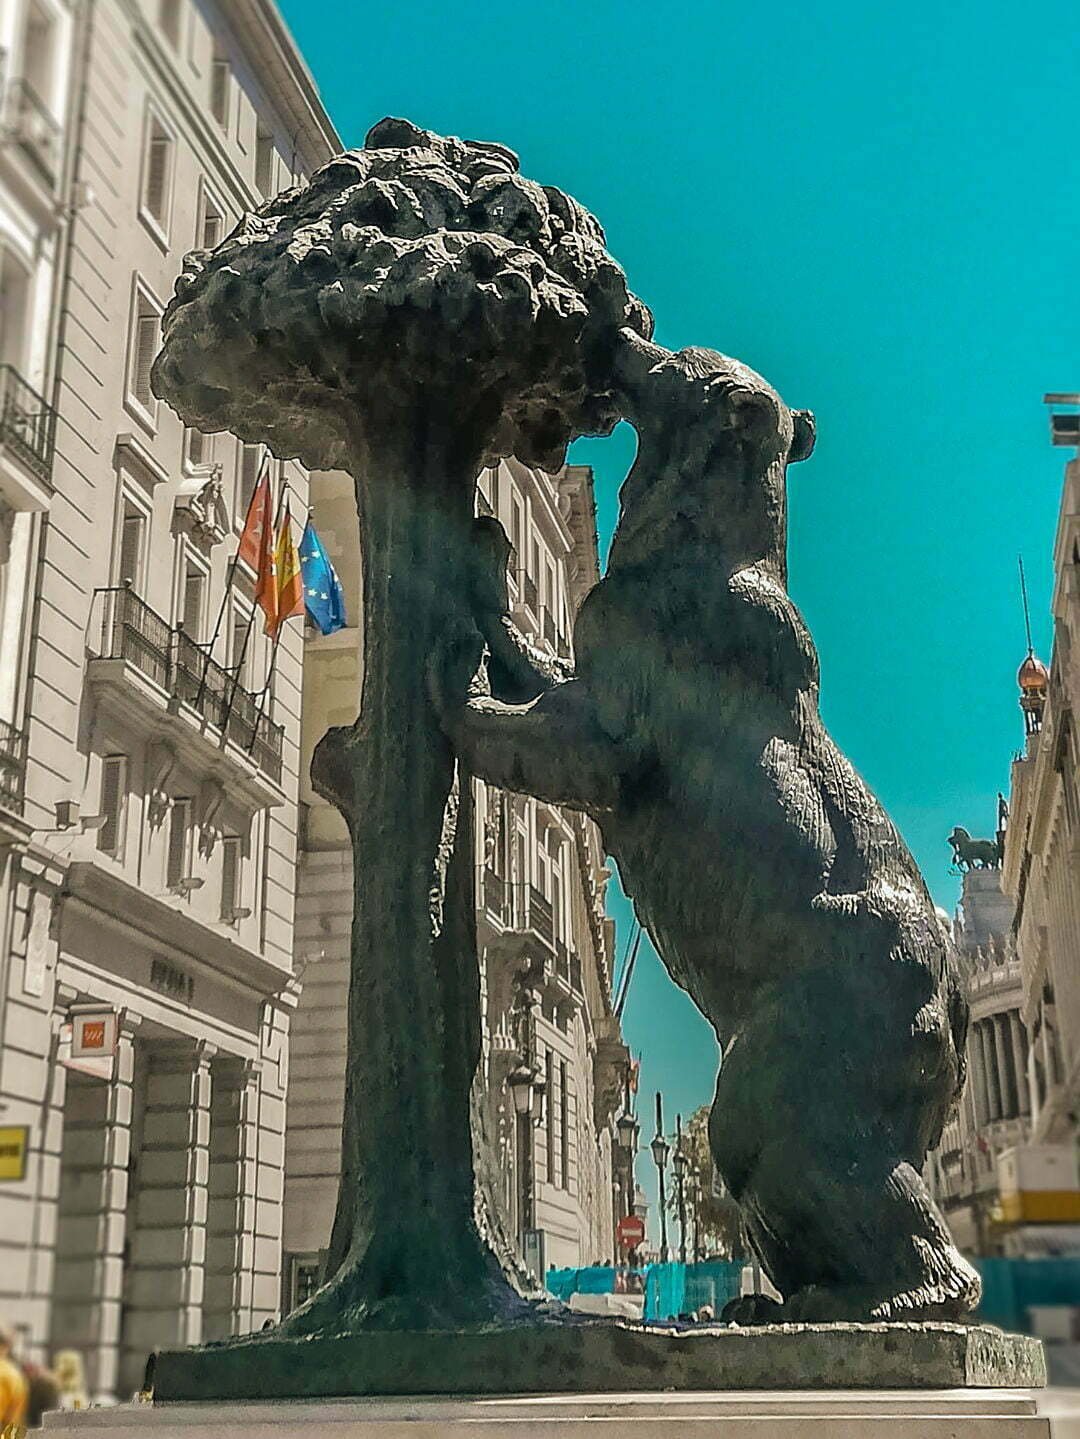 the iconic bear and the strawberry tree sculpture in central madrid